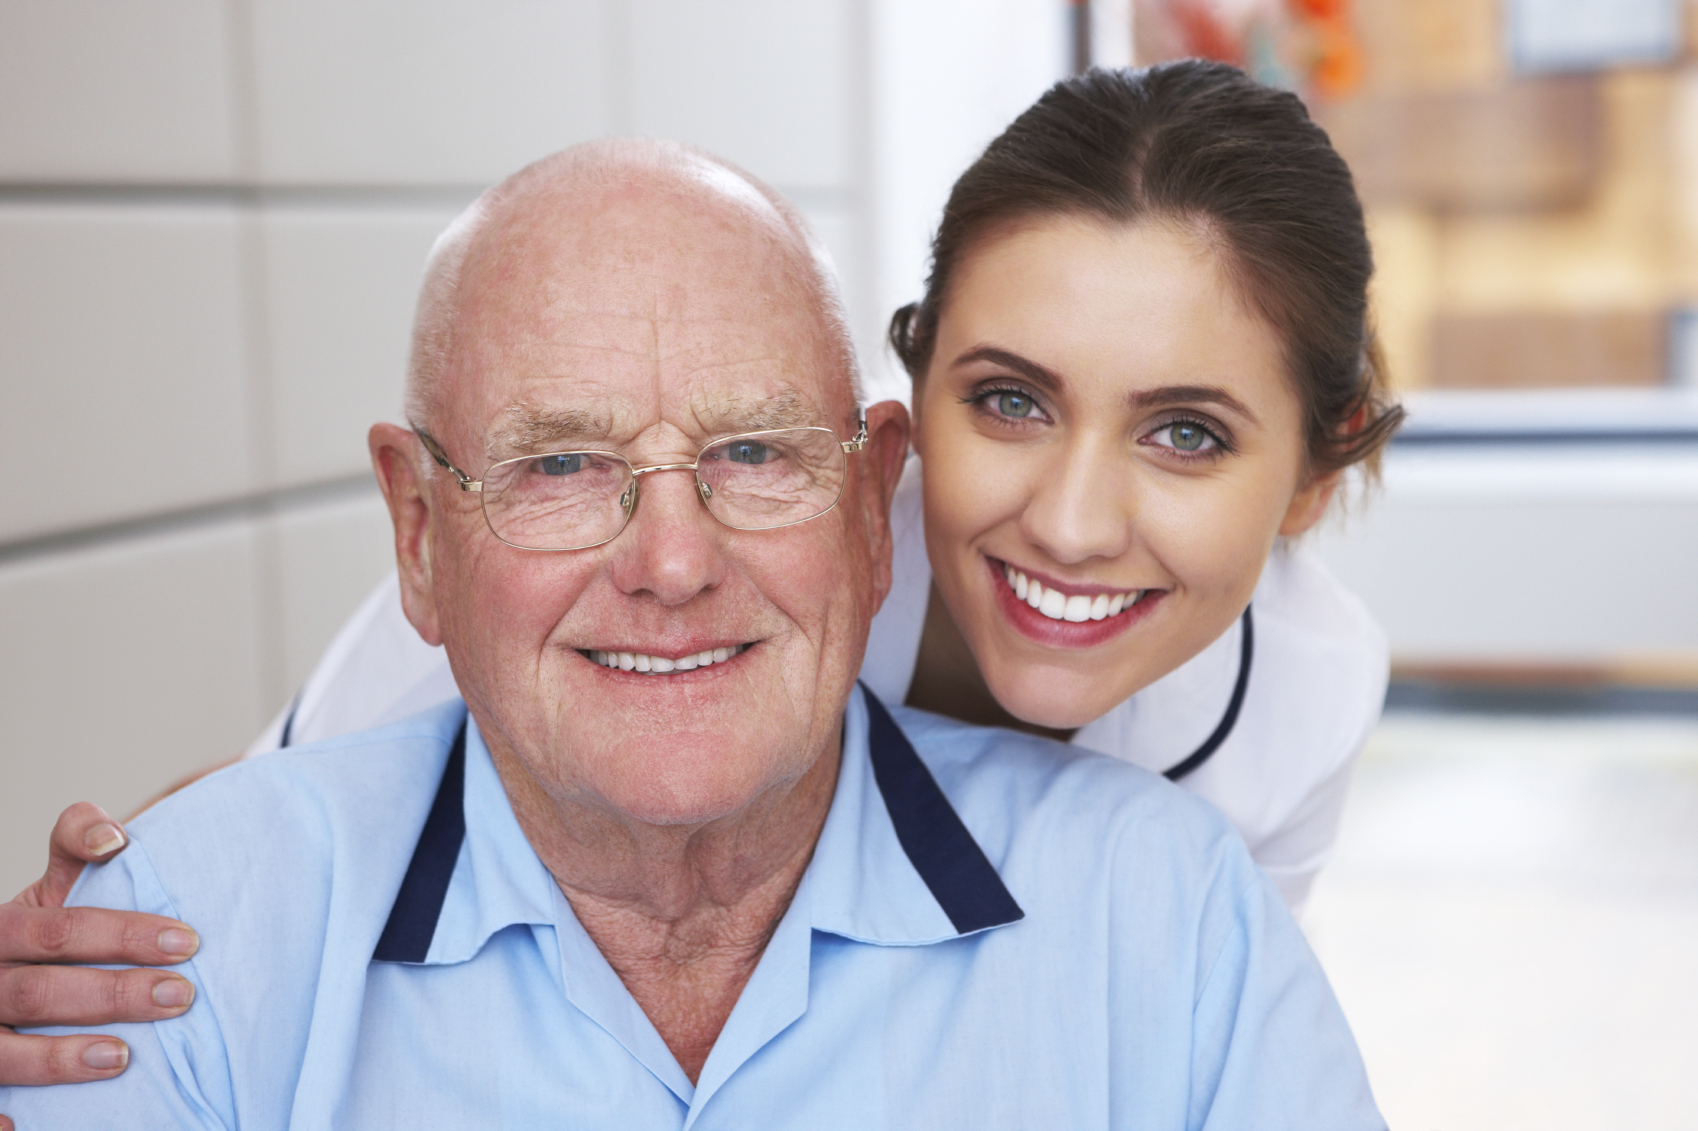 Attractive nurse and her elderly patient smile together for the camera. Horizontal shot.